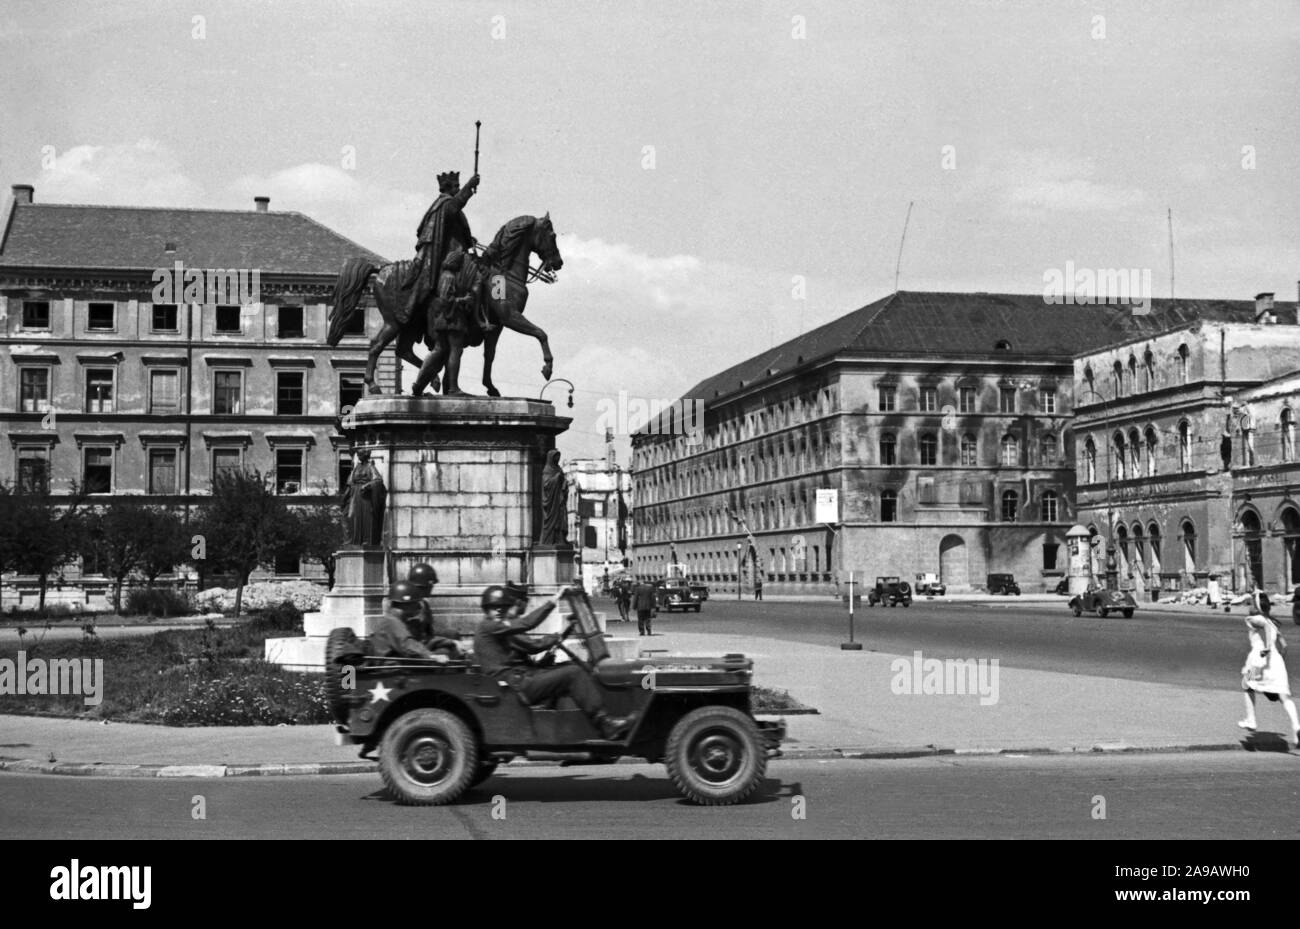 A jeep with American GI soldiers cruising through Munich at Odeonsplatz square, Germany 1940s. Stock Photo